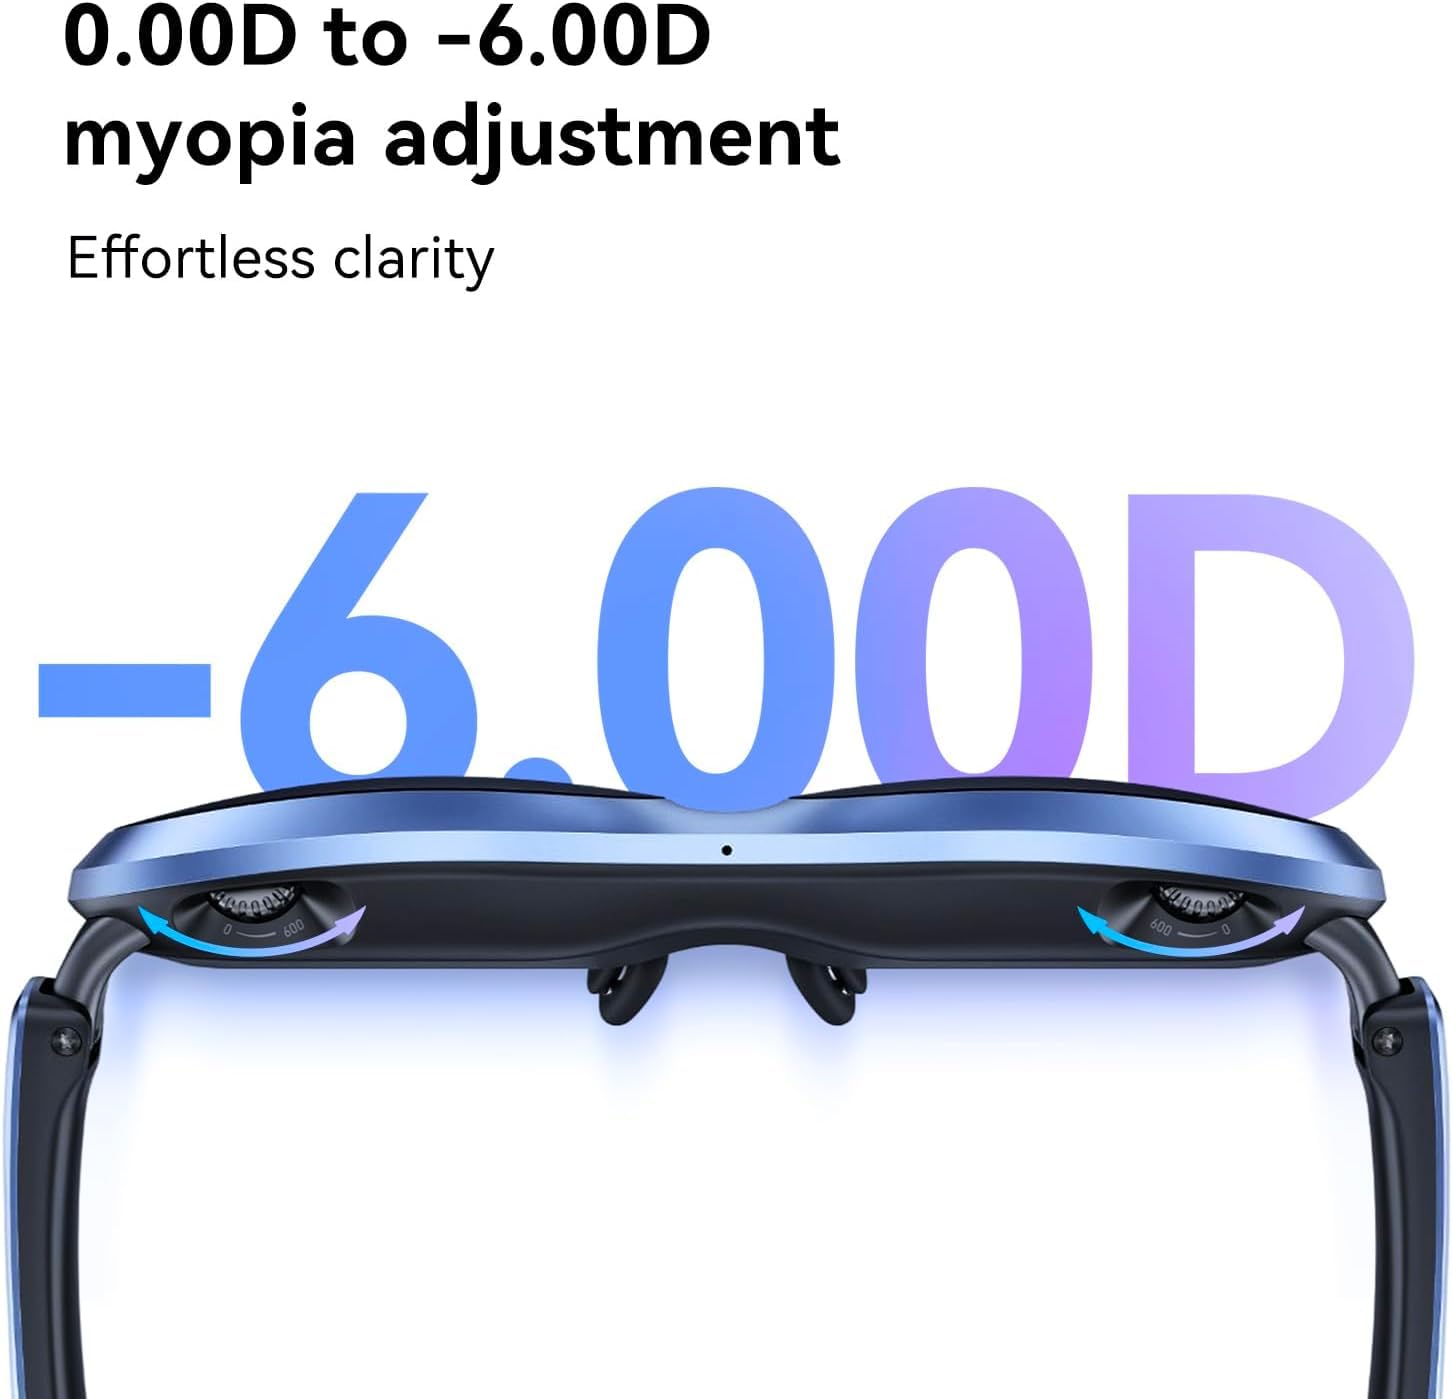 Rokid Max AR Glasses, Augmented Reality Glasses Wearable Headsets Smart Glasses for Video Display, Myopia Friendly Portable Massive 1080P Screen, Game, Watch on Android/iOS/PC/Tablets/Game Consoles - ARVRedtech.com | AR & VR Education Technology